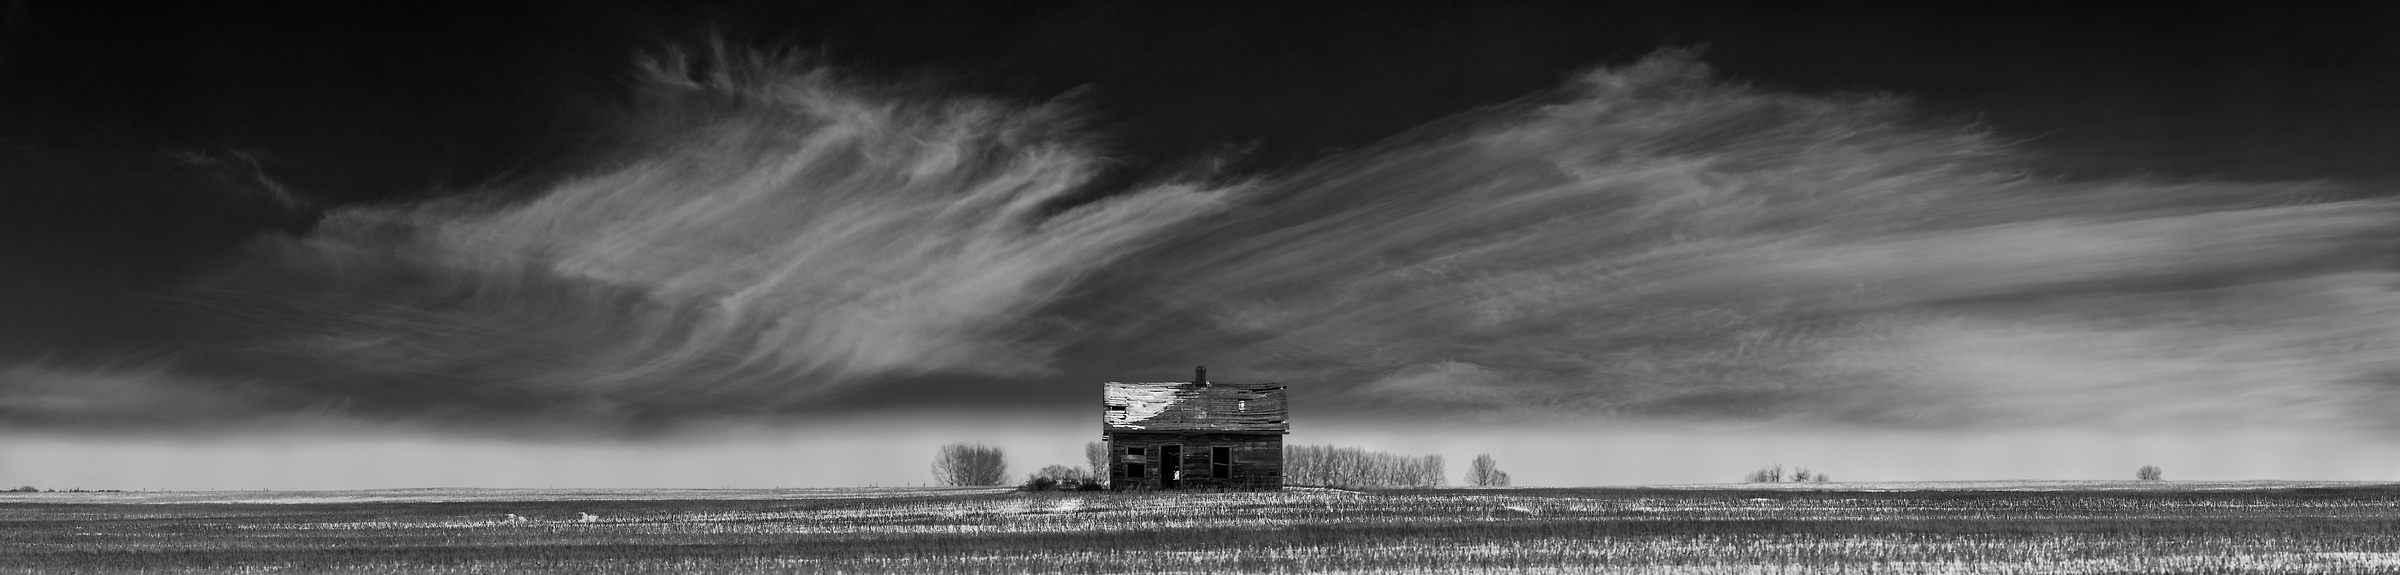 1,647 megapixels! A very high resolution, black and white VAST photo print of an abandoned house on a prairie with snow; landscape photograph created by Scott Dimond in Wheatland County, Alberta, Canada